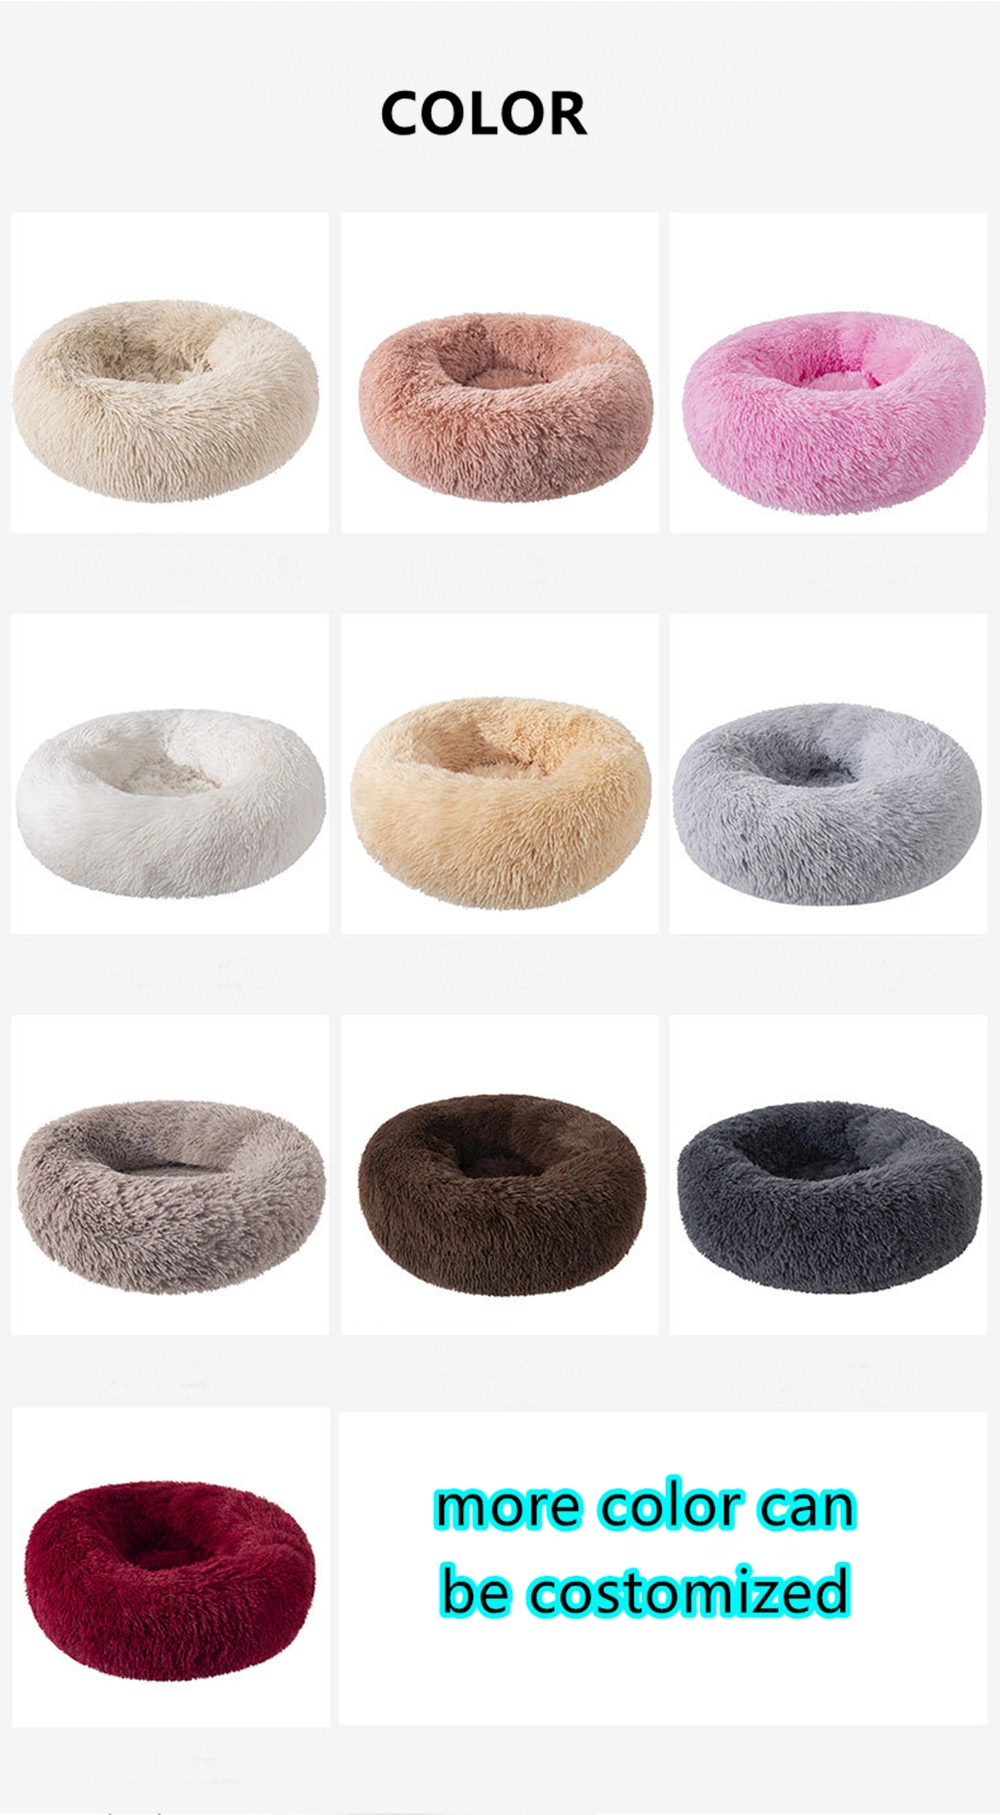 Fluffy Calming Dog Bed Plush Donut Pet Bed Sleeping Bag Kennel Cat Puppy Sofa Bed House